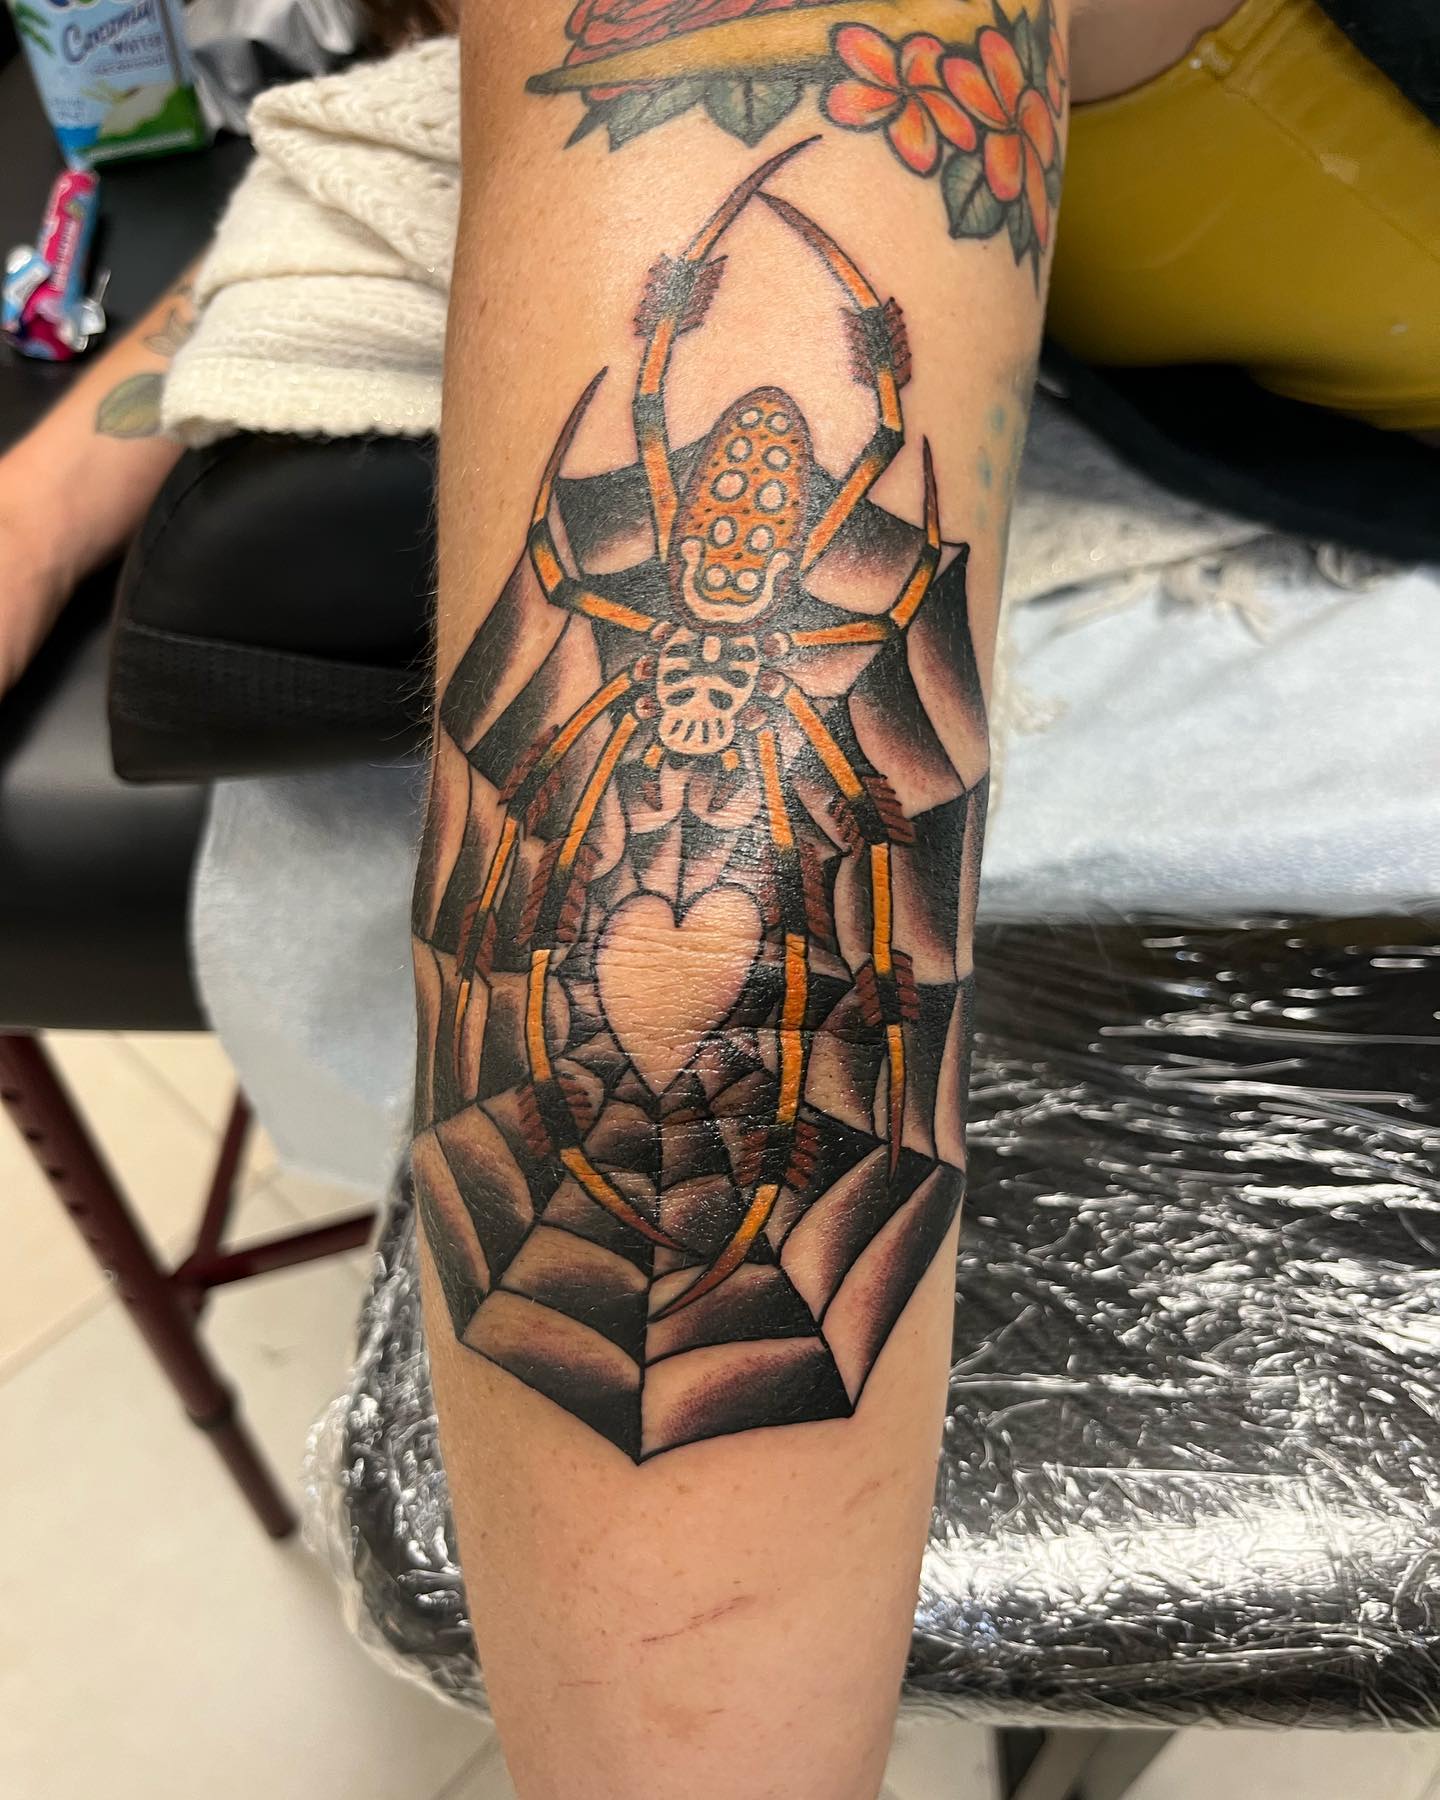 Another fun and colorful spider that you’re going to love on your elbow. Men who have grown a lot and those who are always trying to make things fair and right in life will like this tattoo.